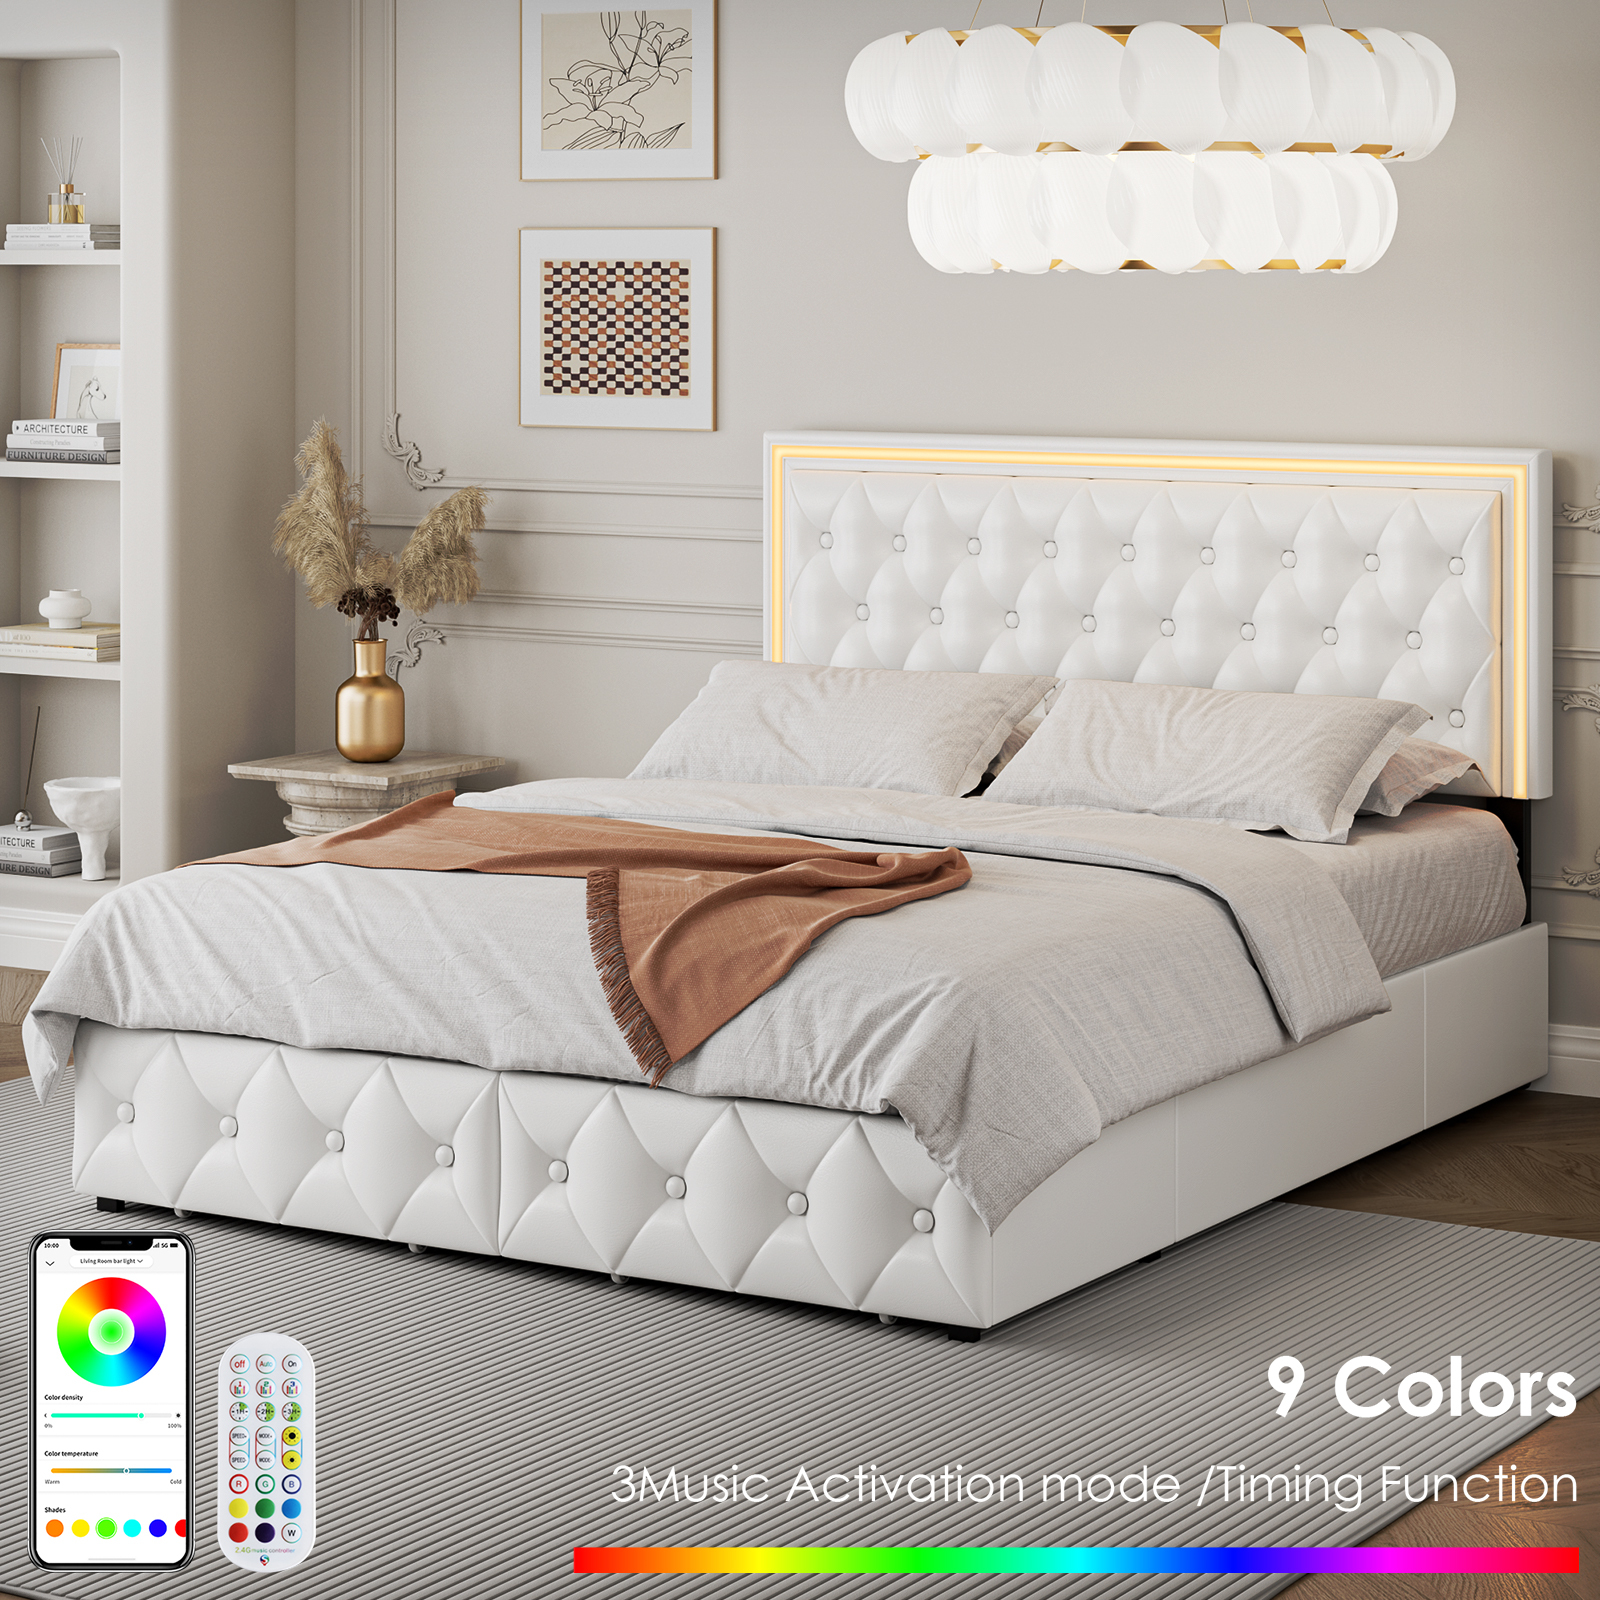 Homfa Queen LED Bed, 9 Colors LED Lights Platform Bed Frame with 4 Storage Drawers, Adjustable Upholstered Headboard with Button Tufted, PU White - image 3 of 10